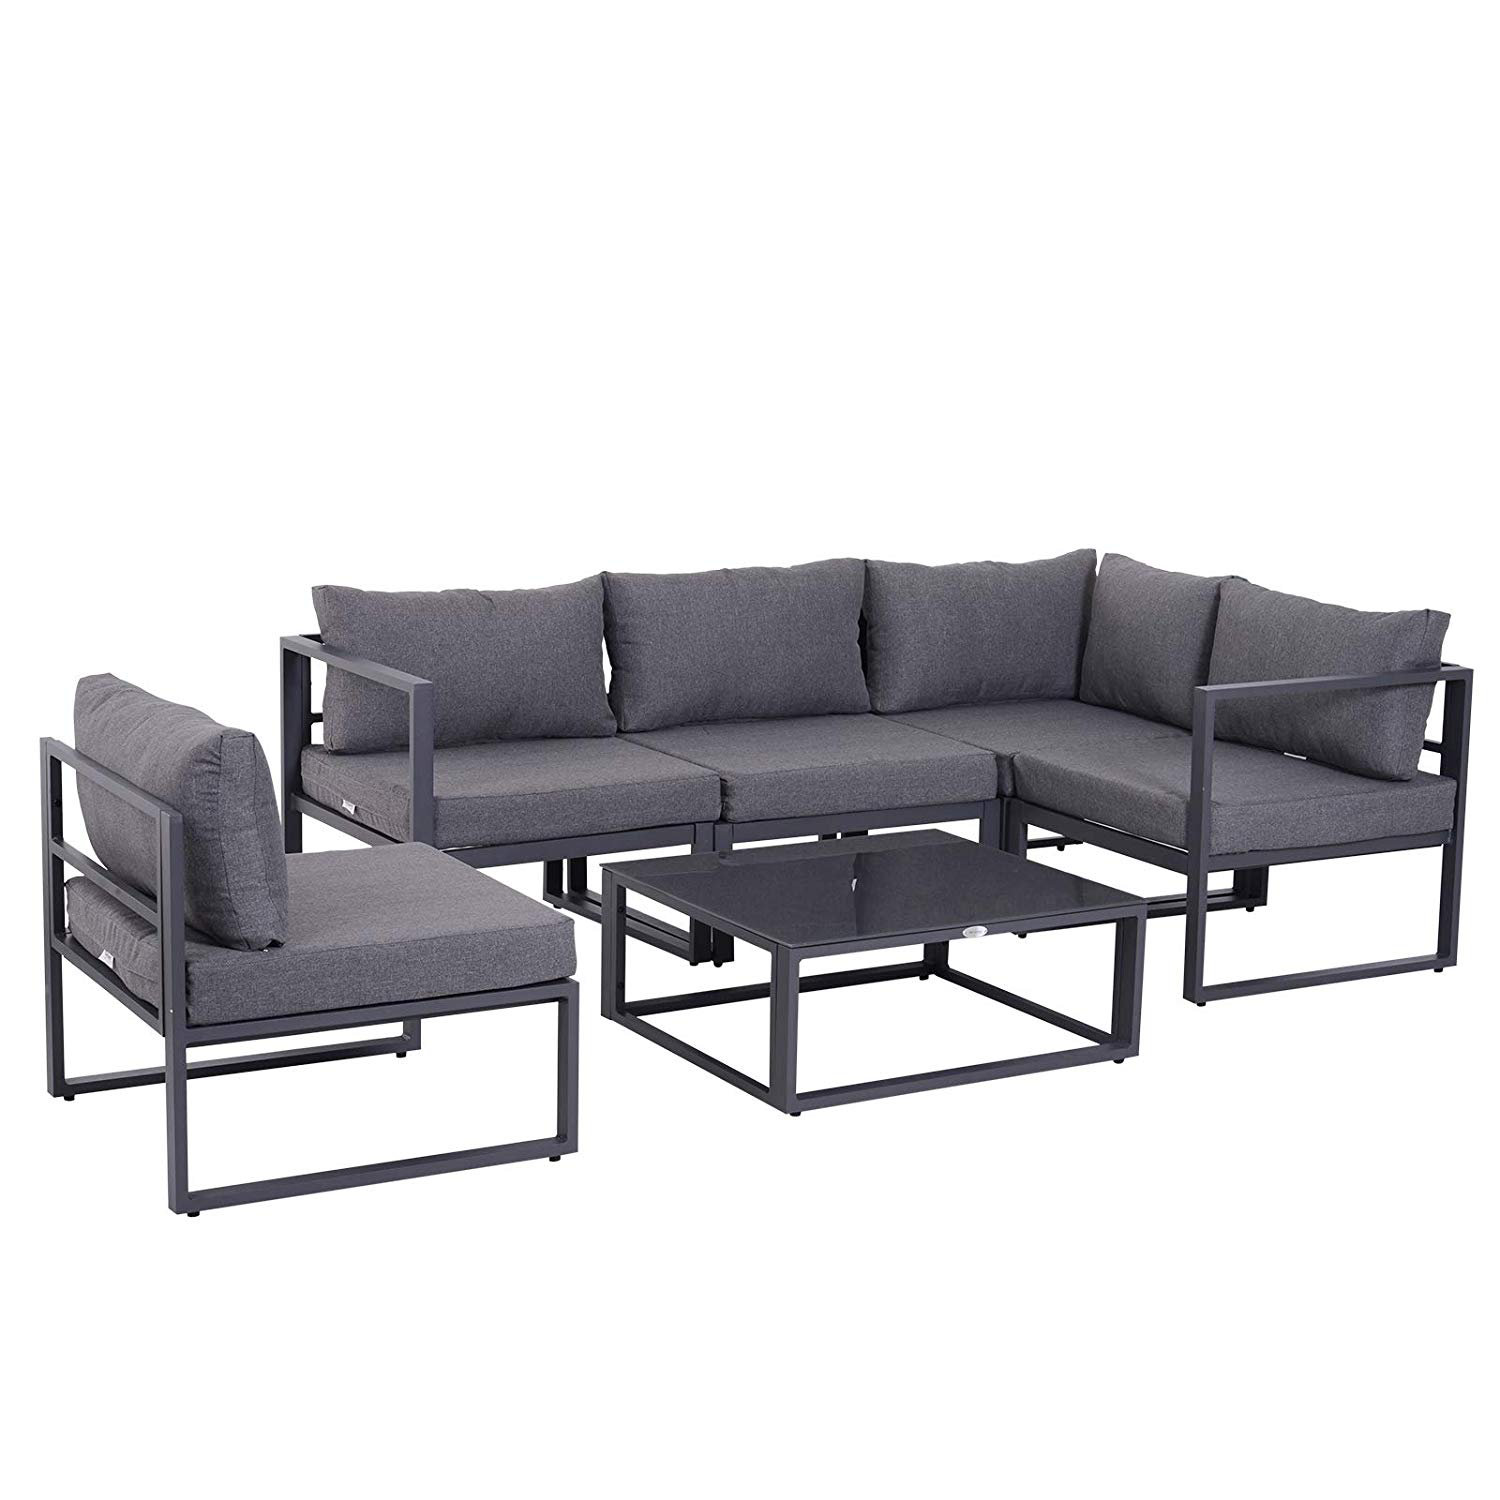 Broome 4 - Person Garden Lounge Set with Cushions